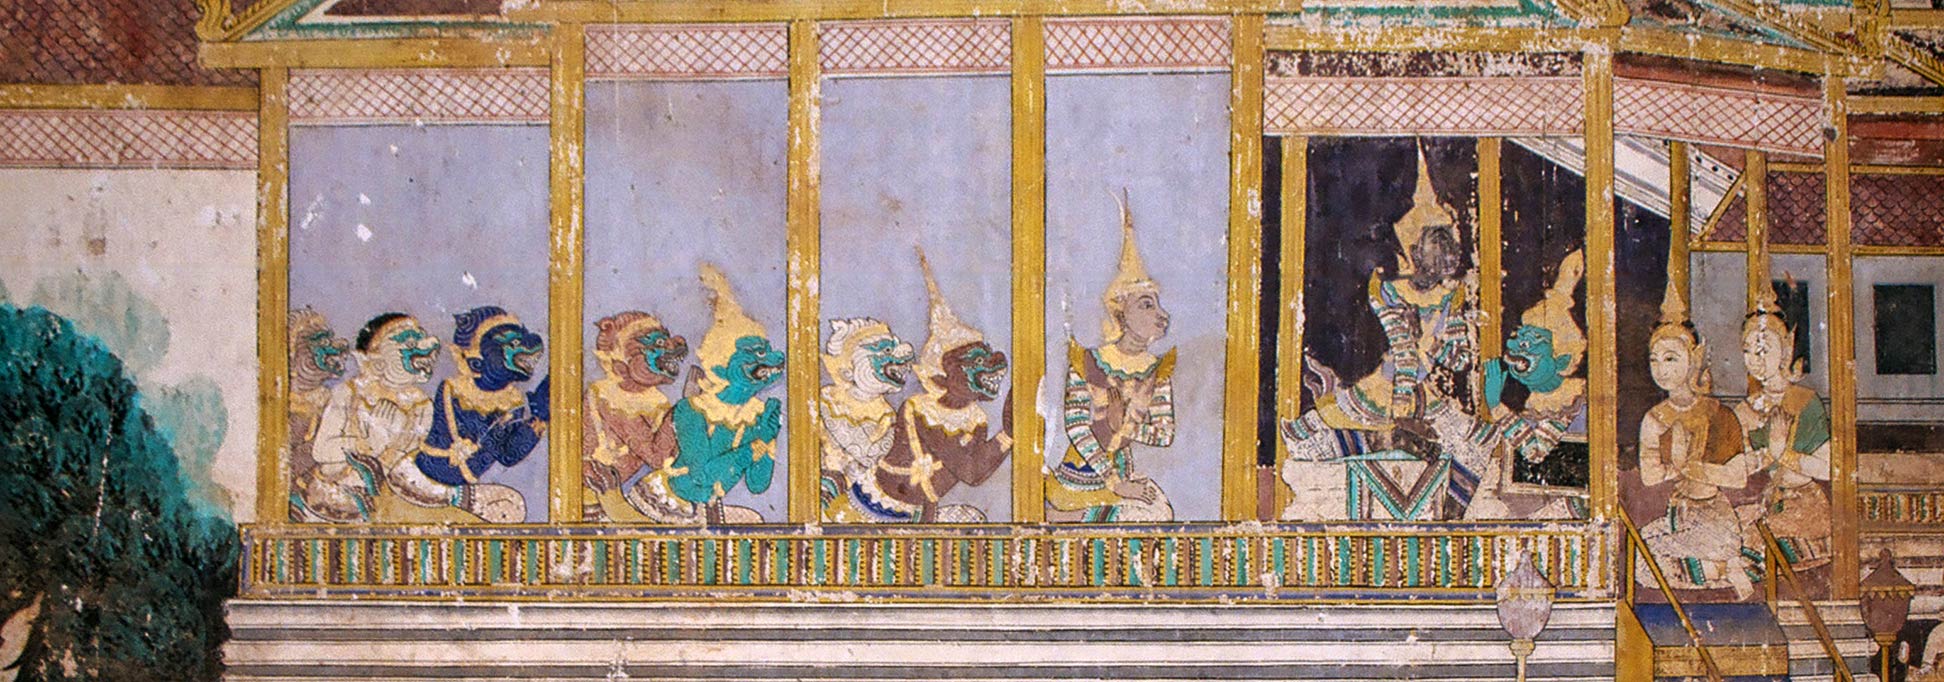 Mural painting of the story of Reamker at the Royal Palace in Phnom Penh